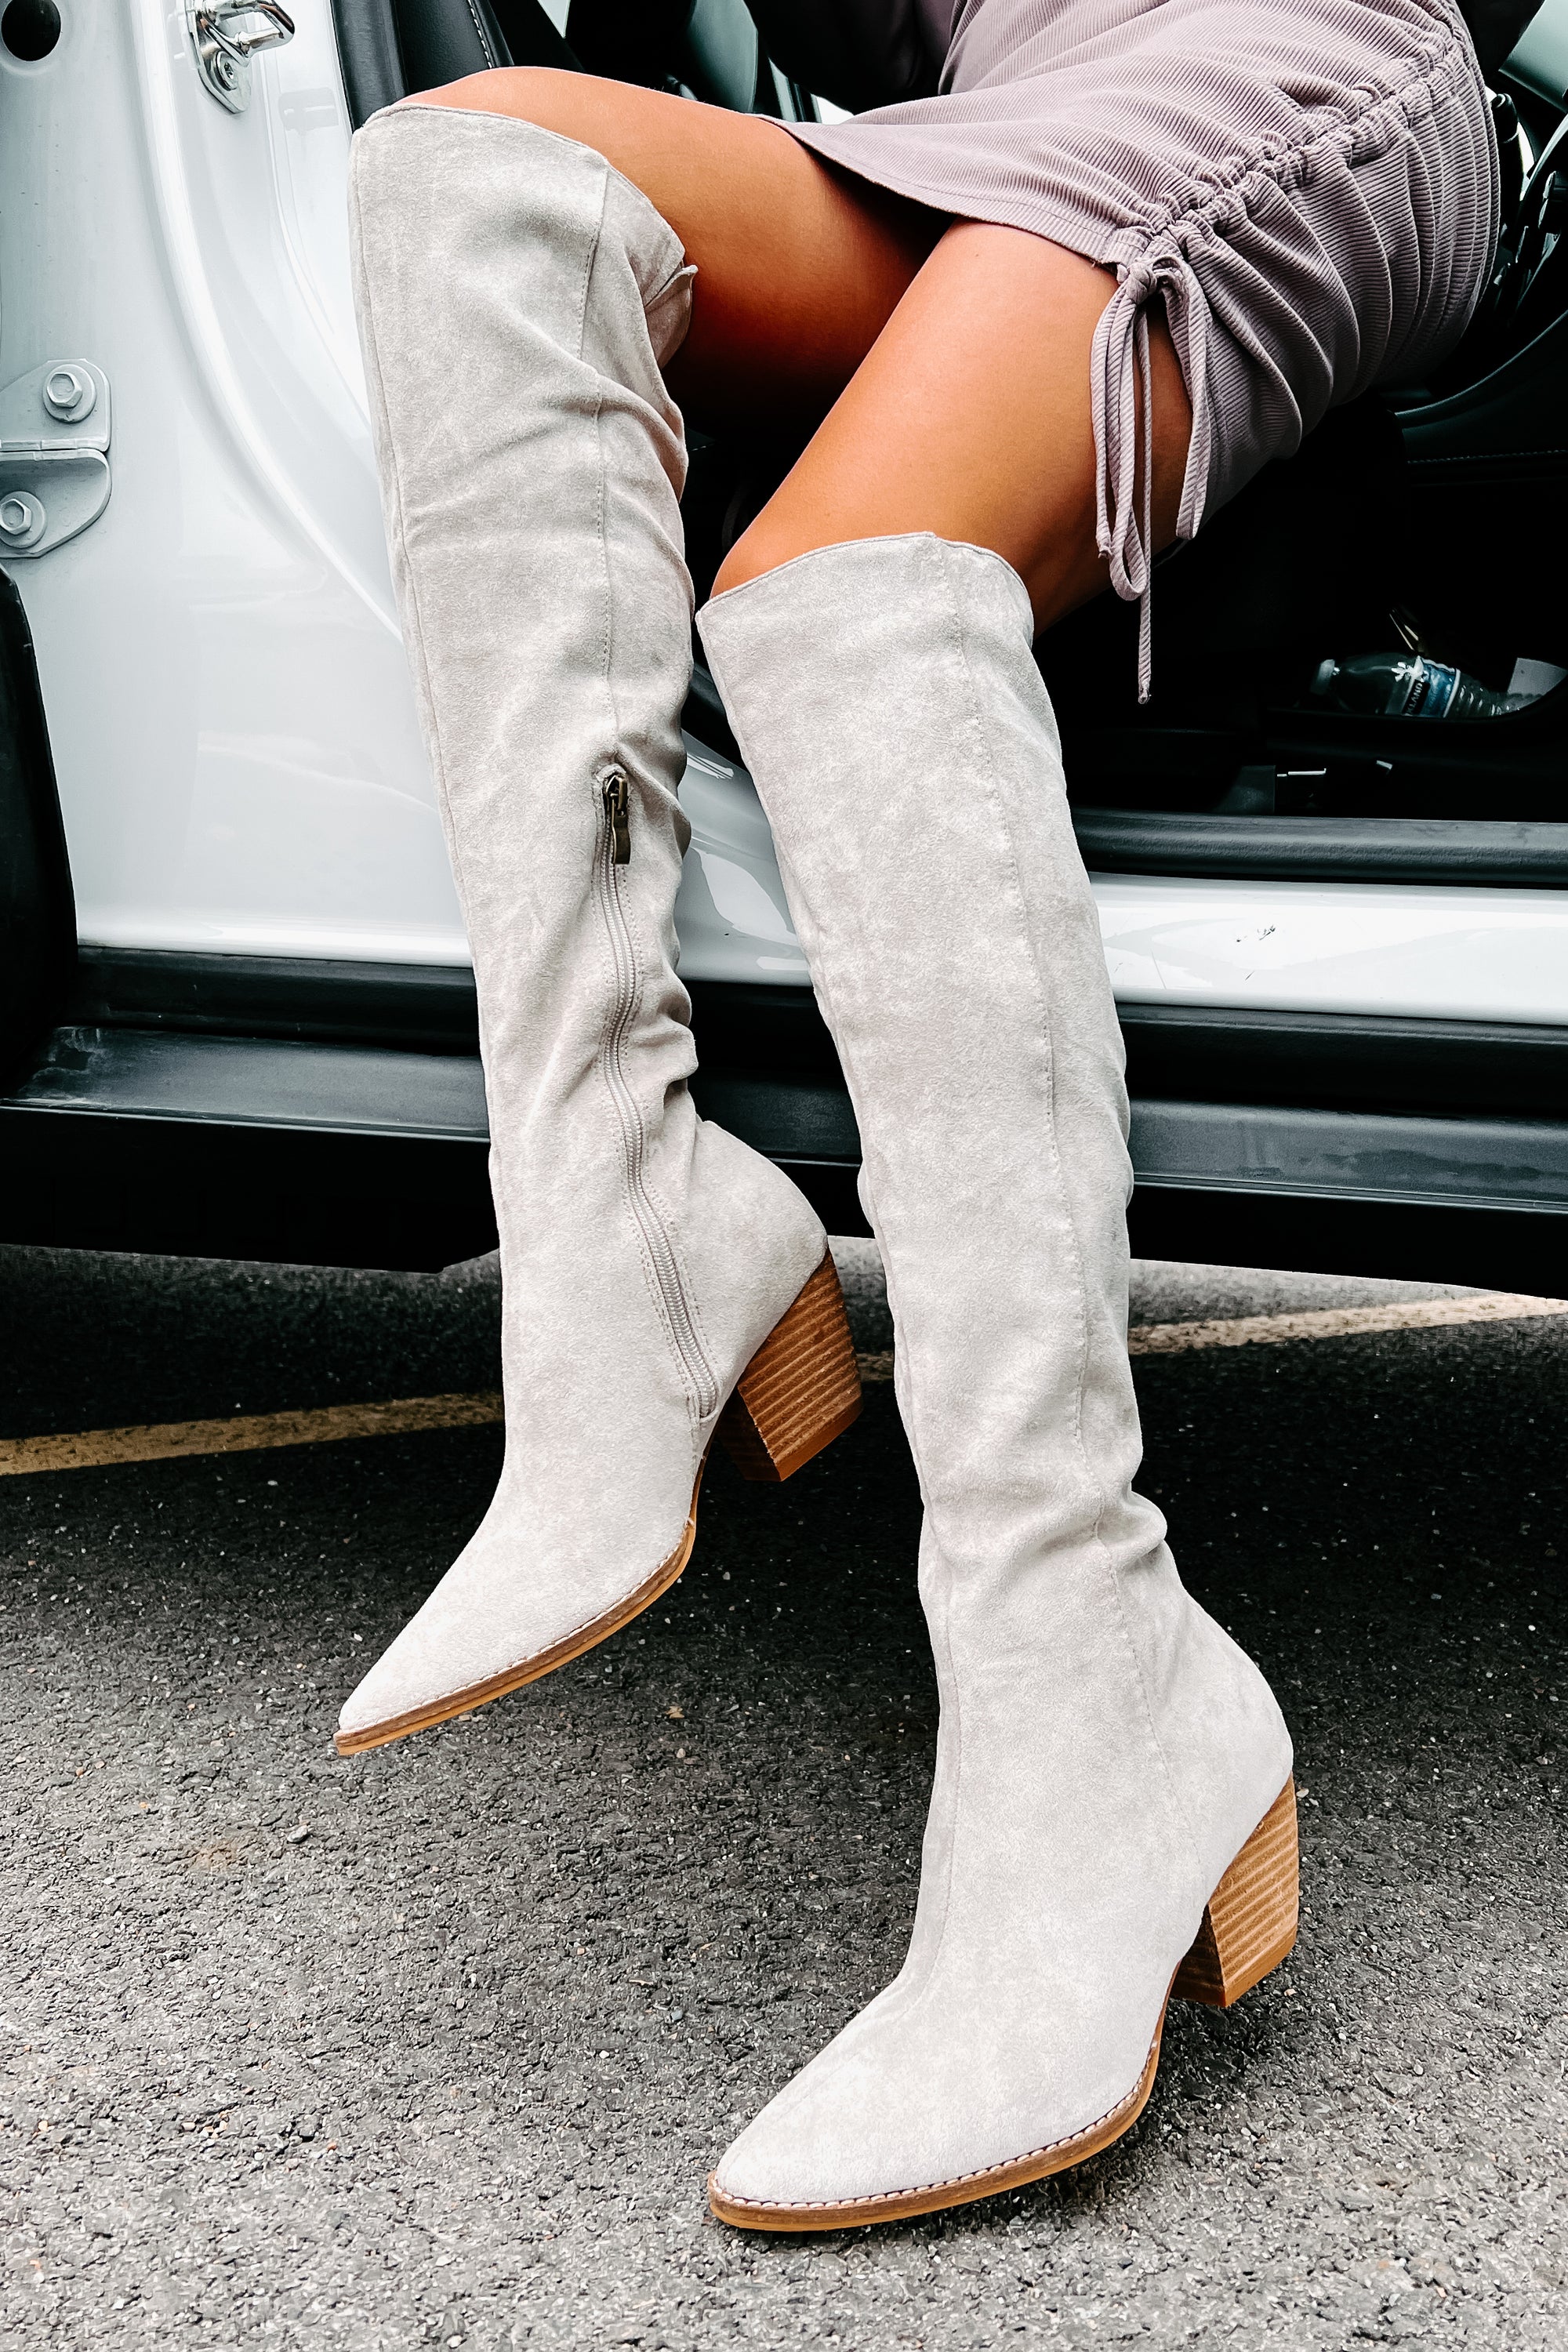 21 Stylish Ways to Slay in Knee High Boots – May the Ray